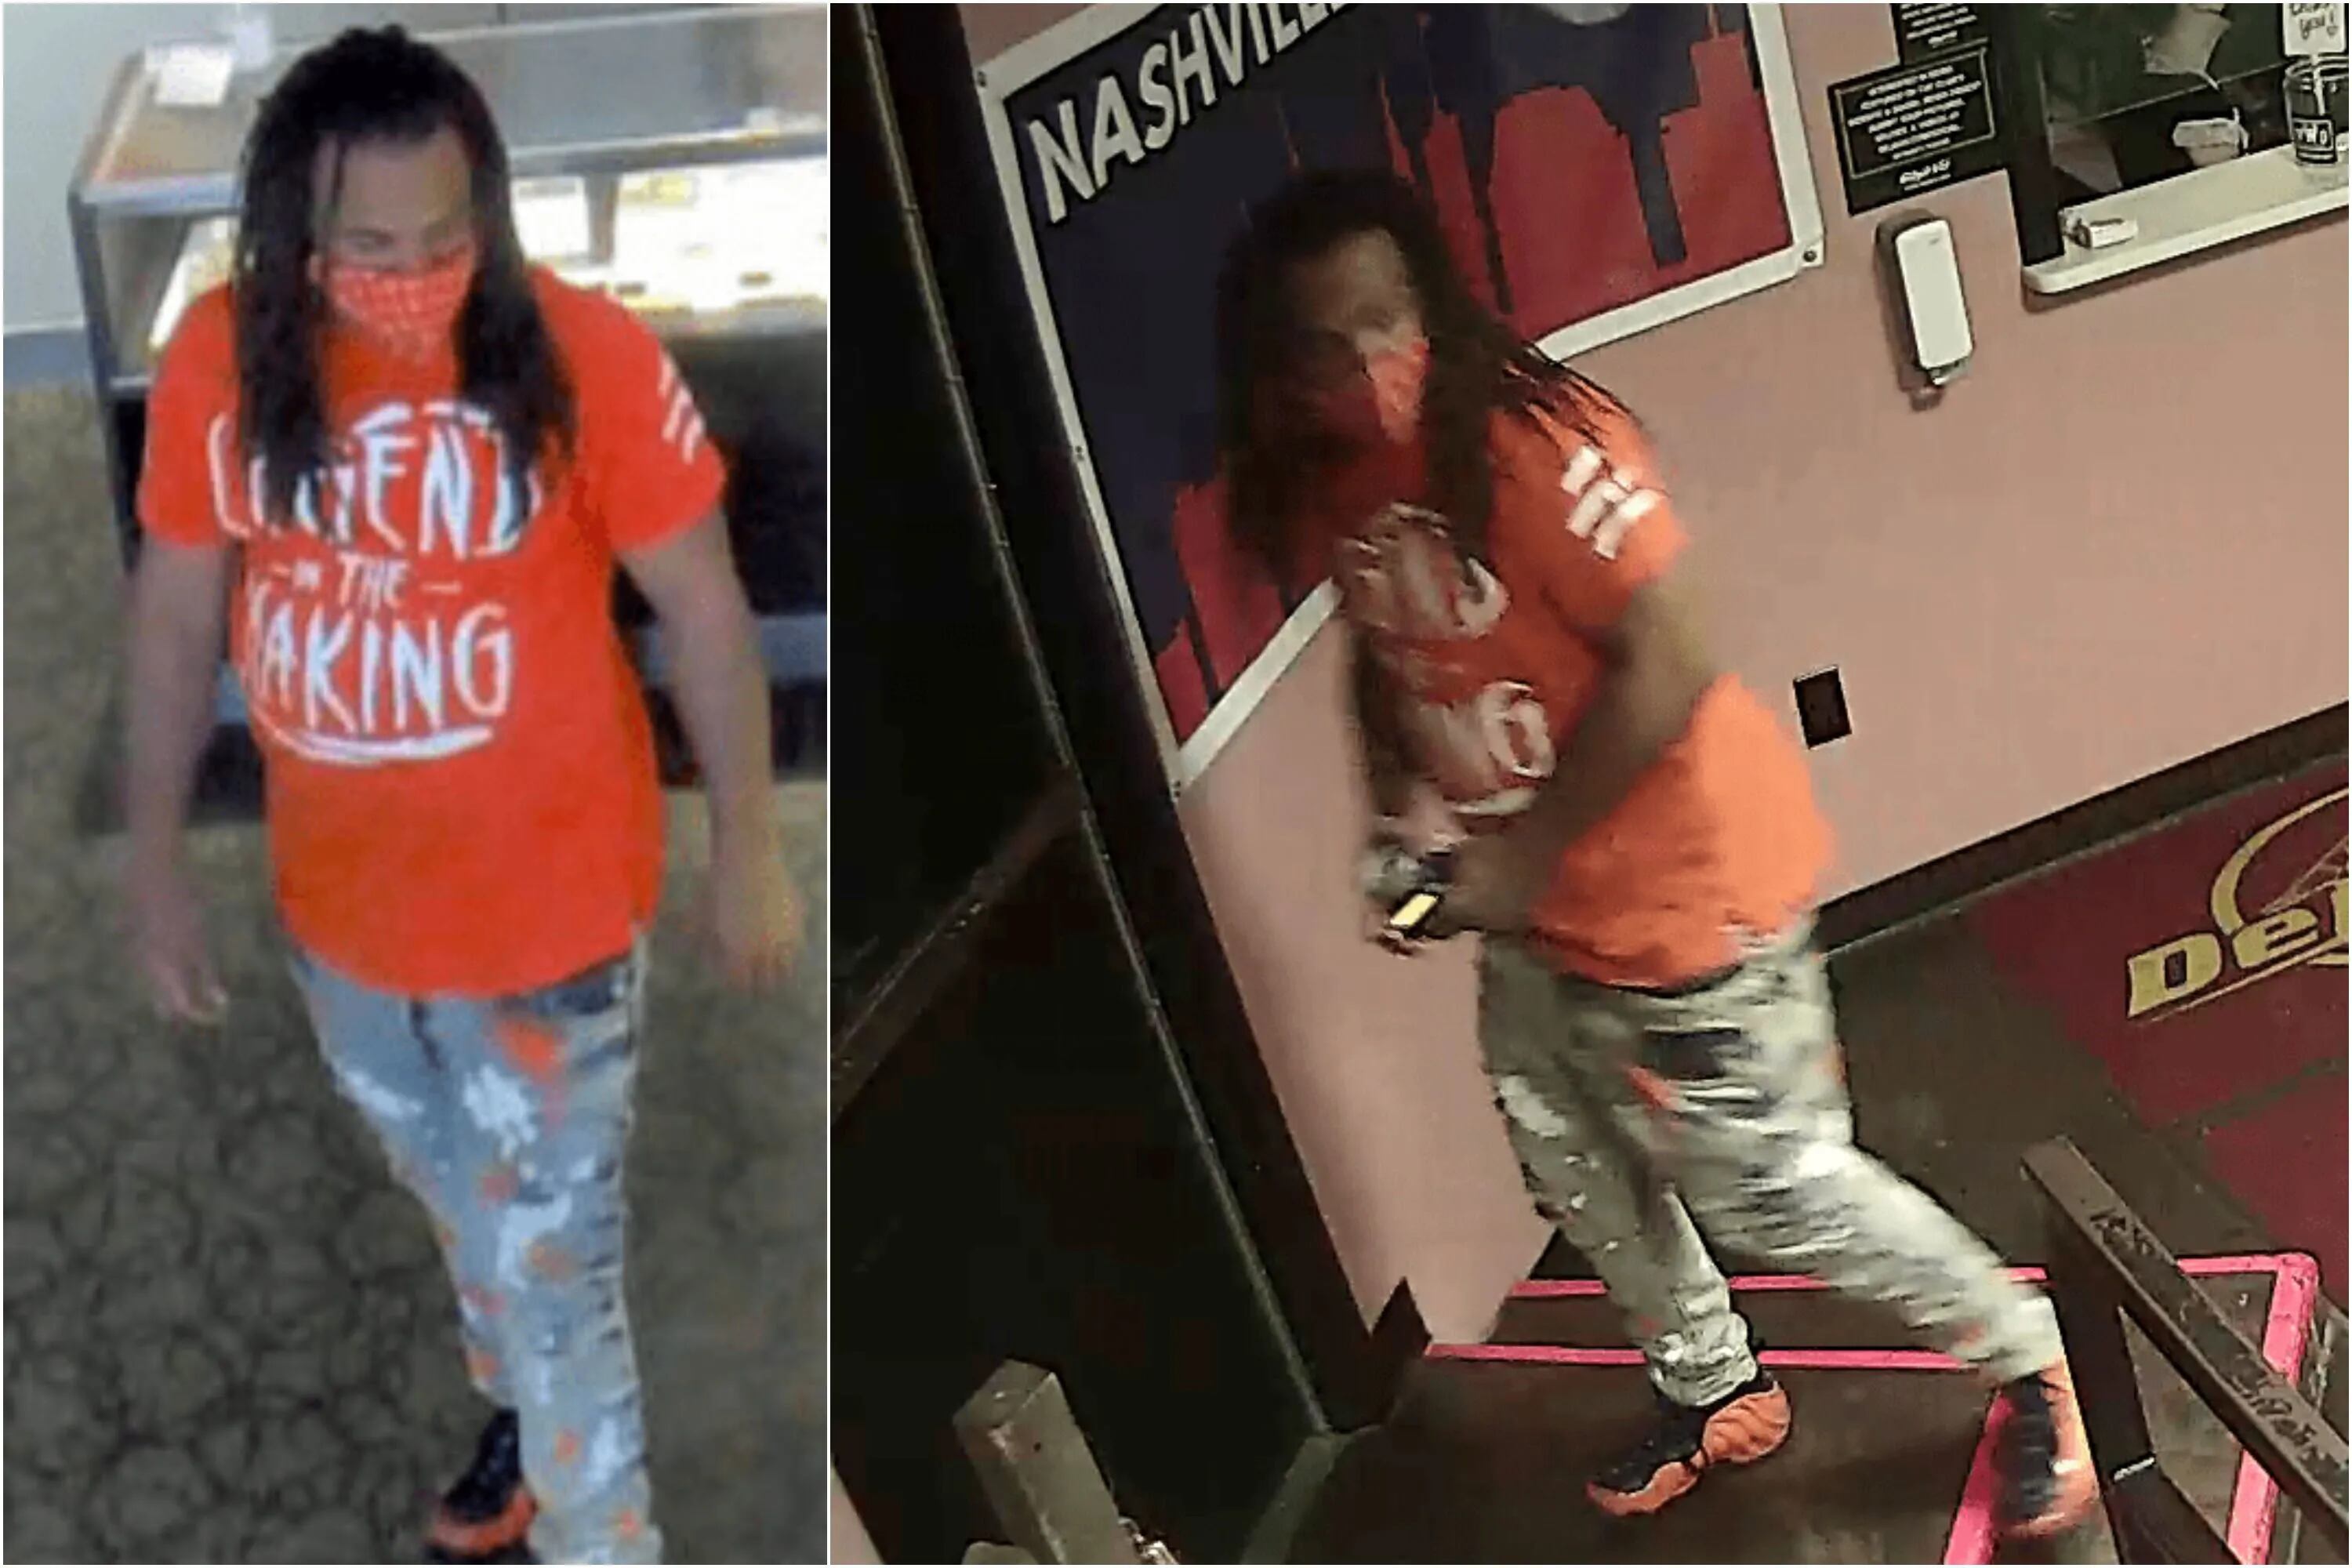 Surveillance footage shows a suspected robber (left) of a jewelry store in Mississippi on April 5. The next day, investigators obtained surveillance footage from a Nashville strip club (right) depicting a man they believe followed a woman home and sexually assaulted her.